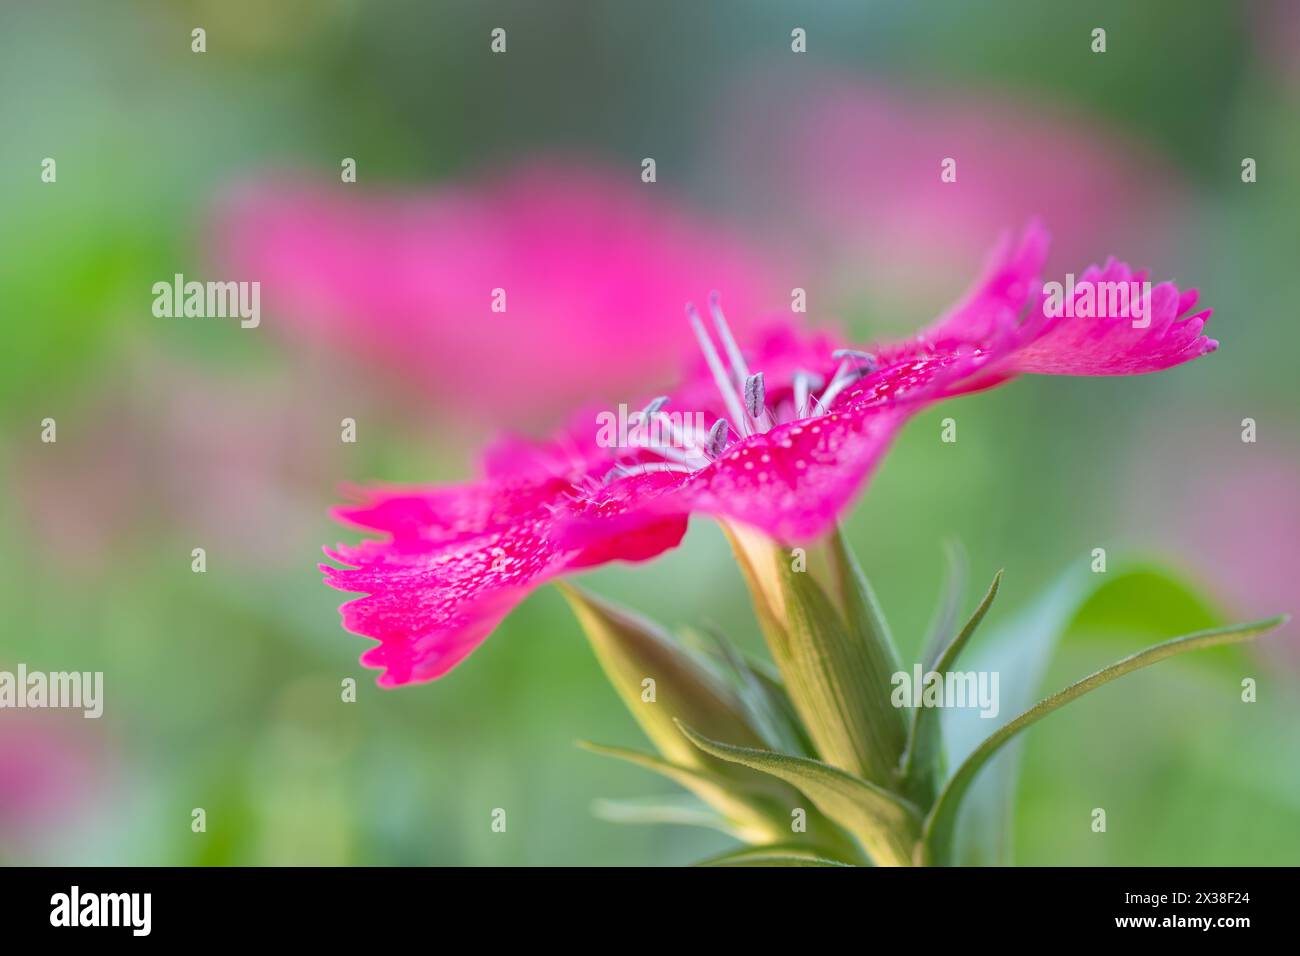 Closeup of a pink dianthus plant growing in the garden. Stock Photo